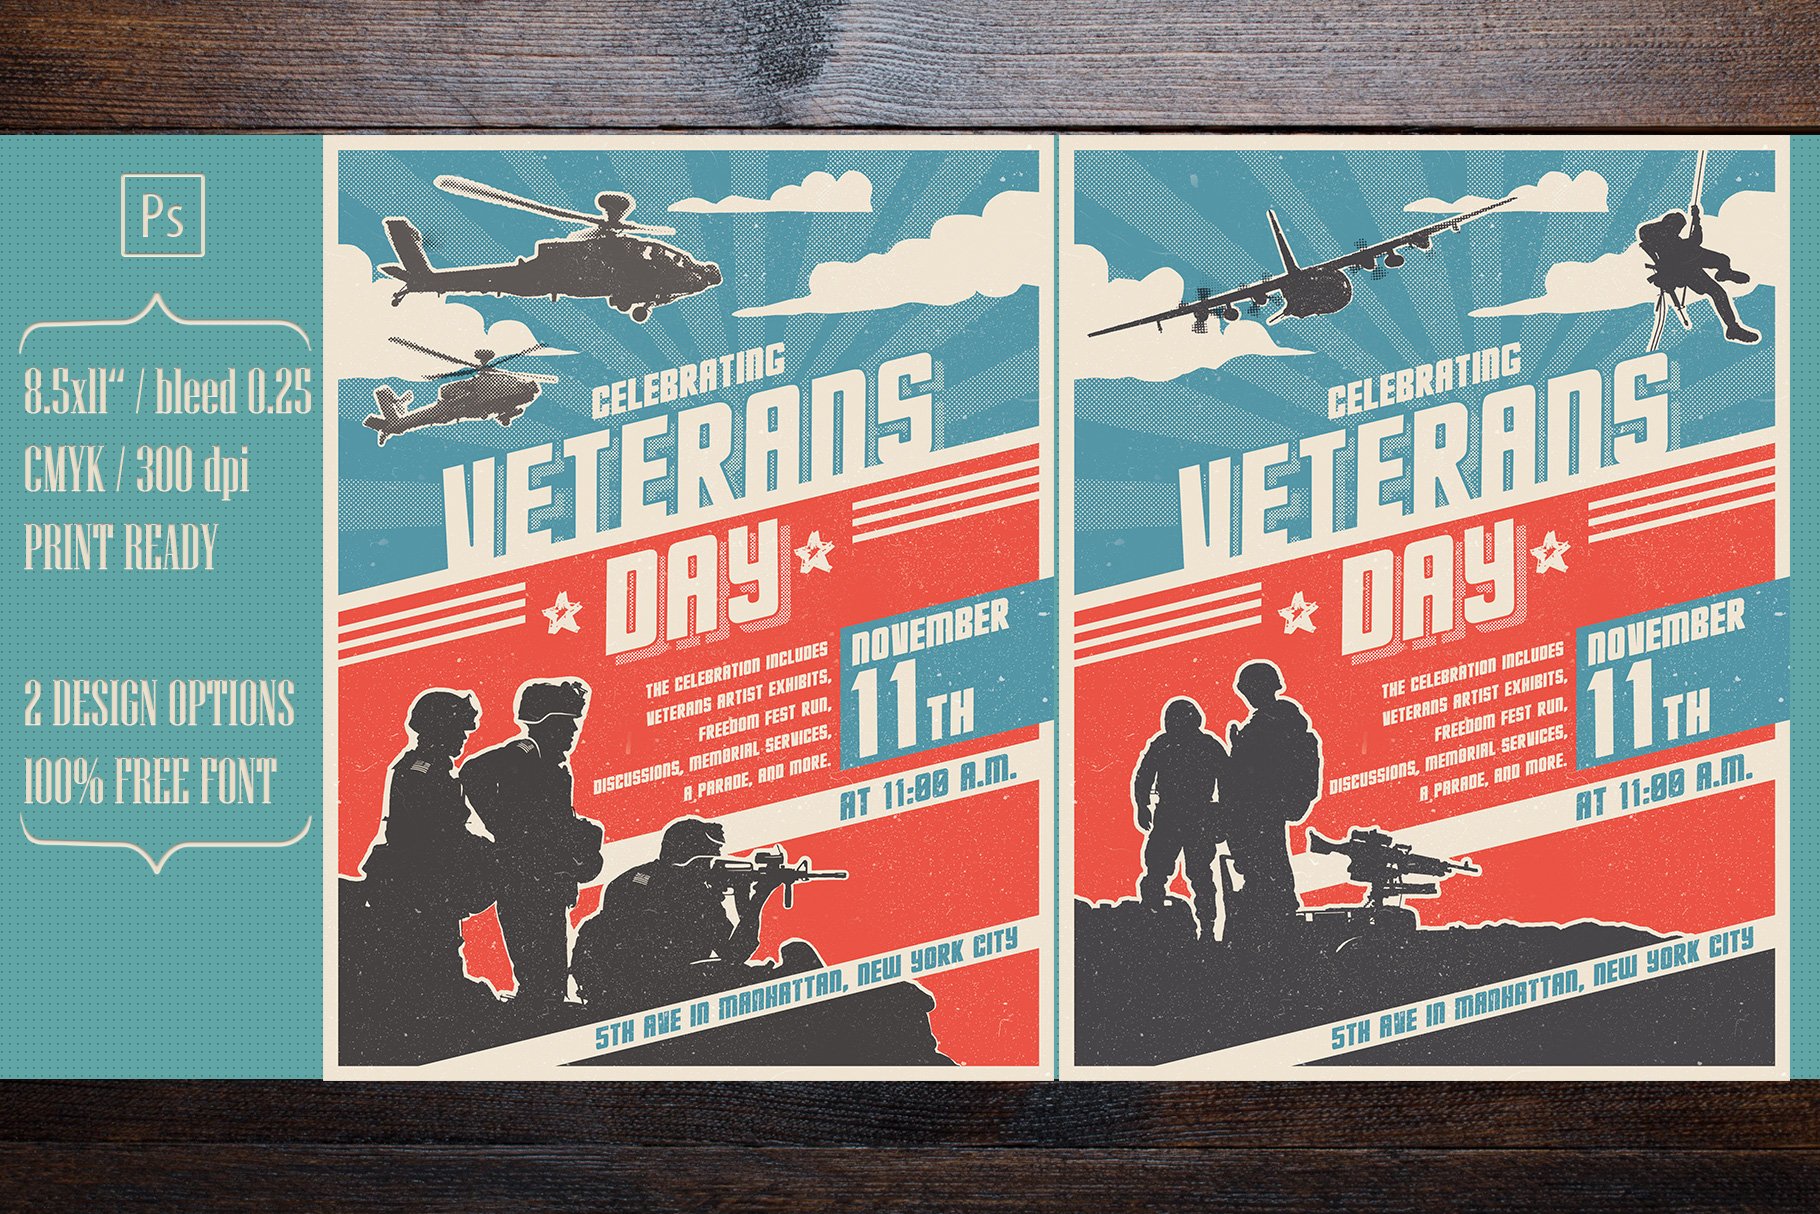 Some features of Veterans day flyers.